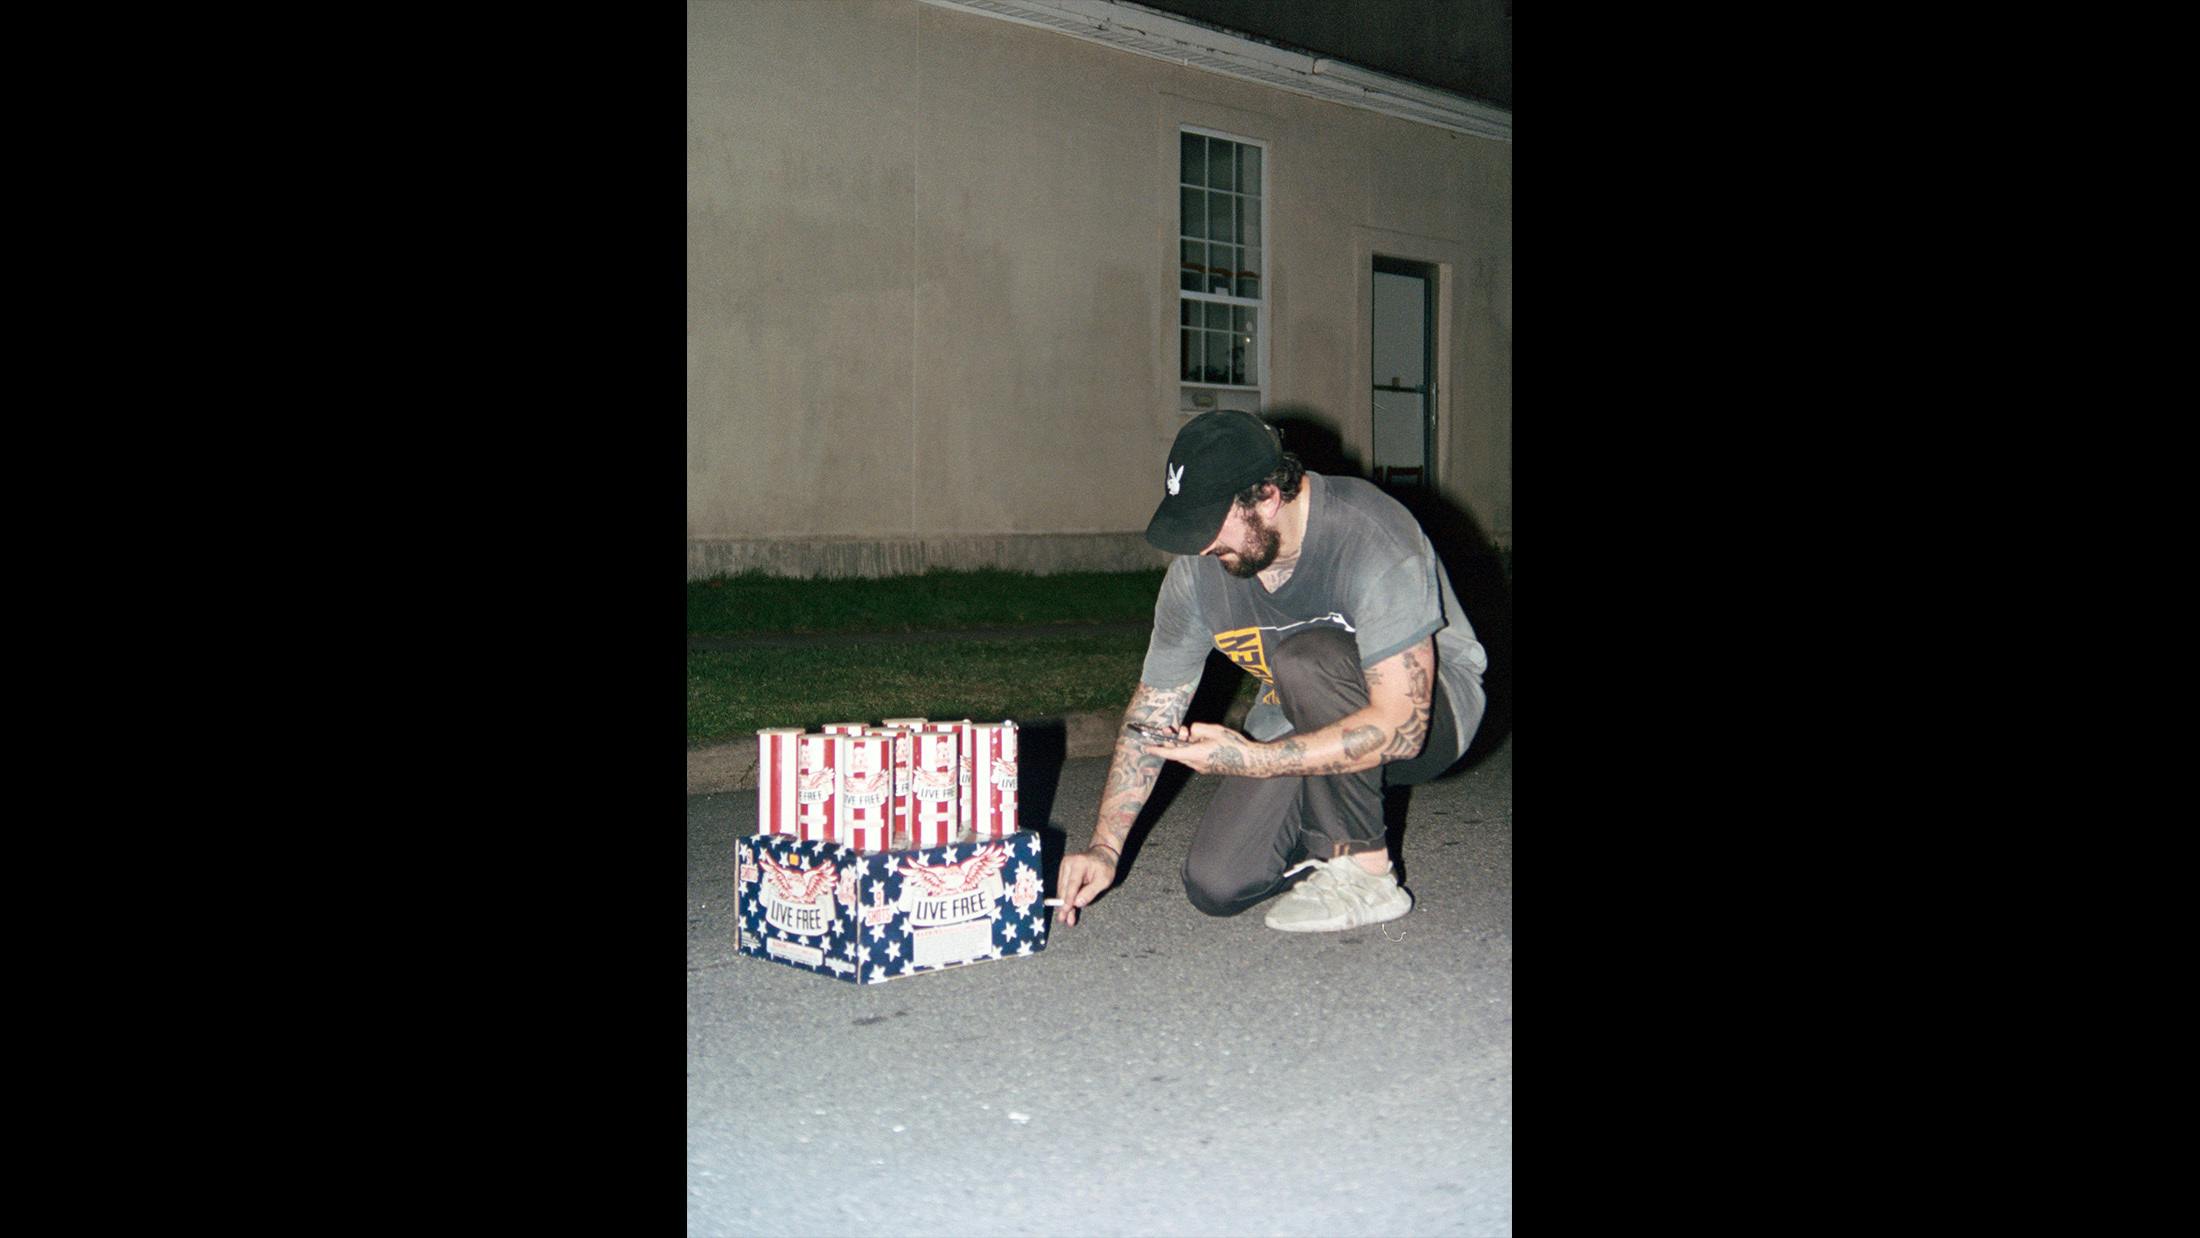 We were playing a show in Savannah, Georgia on the 4th of July. We bought a ton of fireworks in some state where you could, and after we played our show we let them off in the streets. I'm pretty sure this particular one blew up and started spraying fireworks all over the neighborhood directly at us. It was pretty fun.